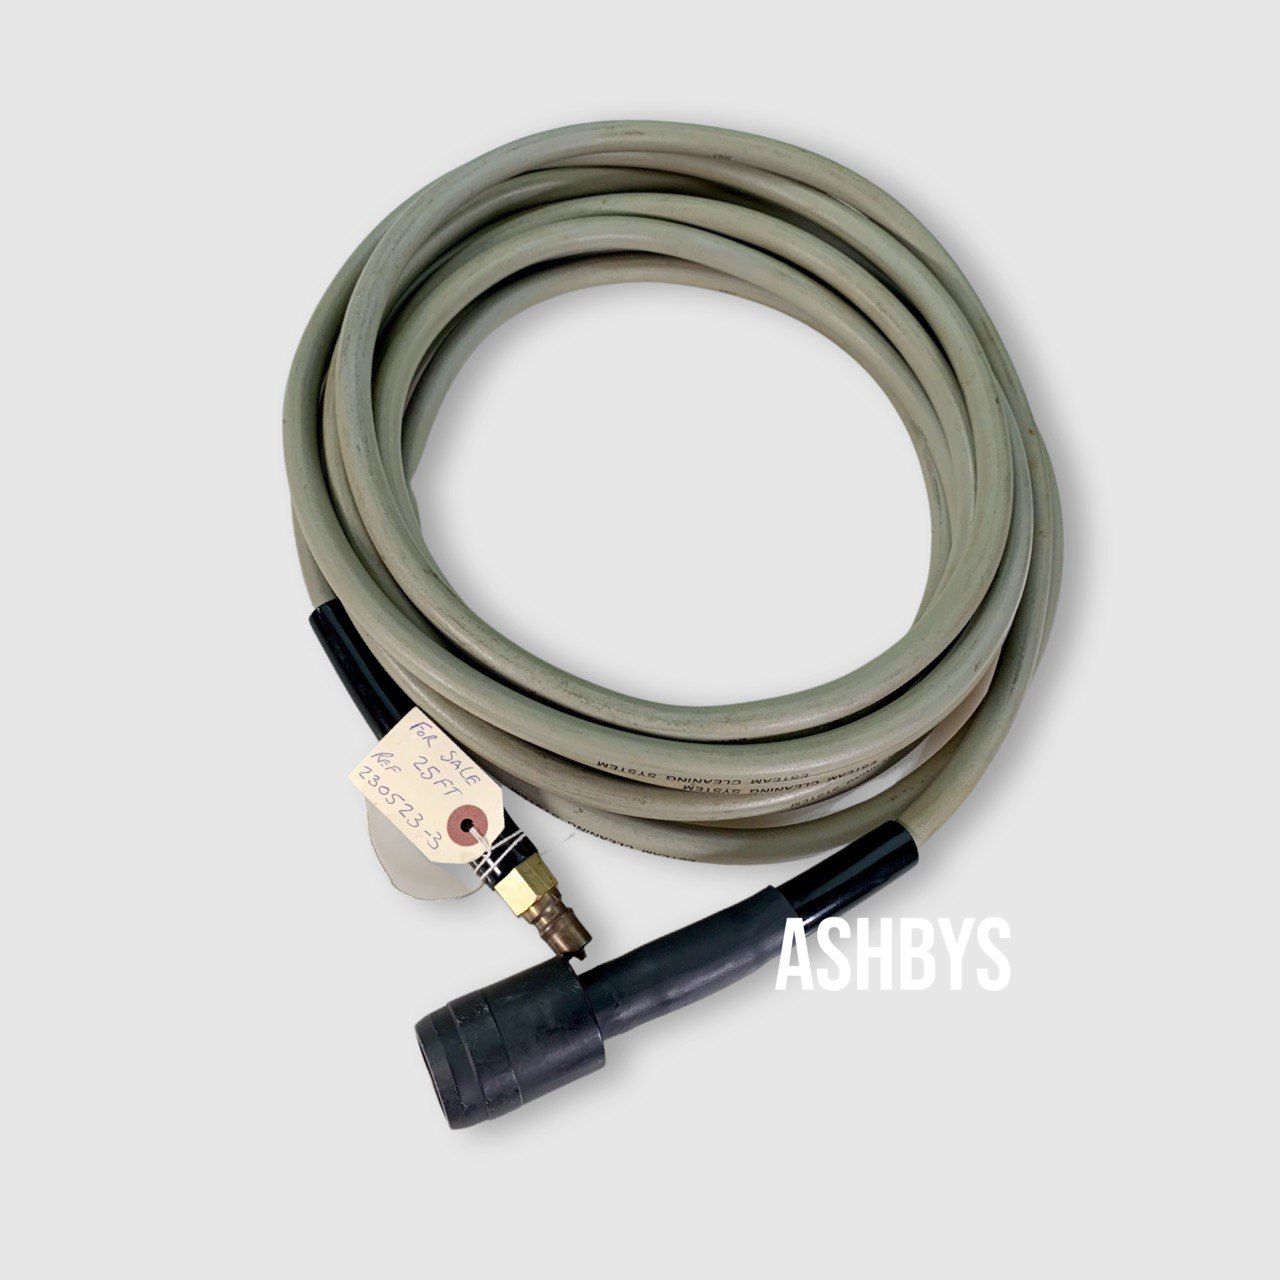 PRE-OWNED 25ft / 7.5m GREY Carpet Cleaners Water Hose ONLY